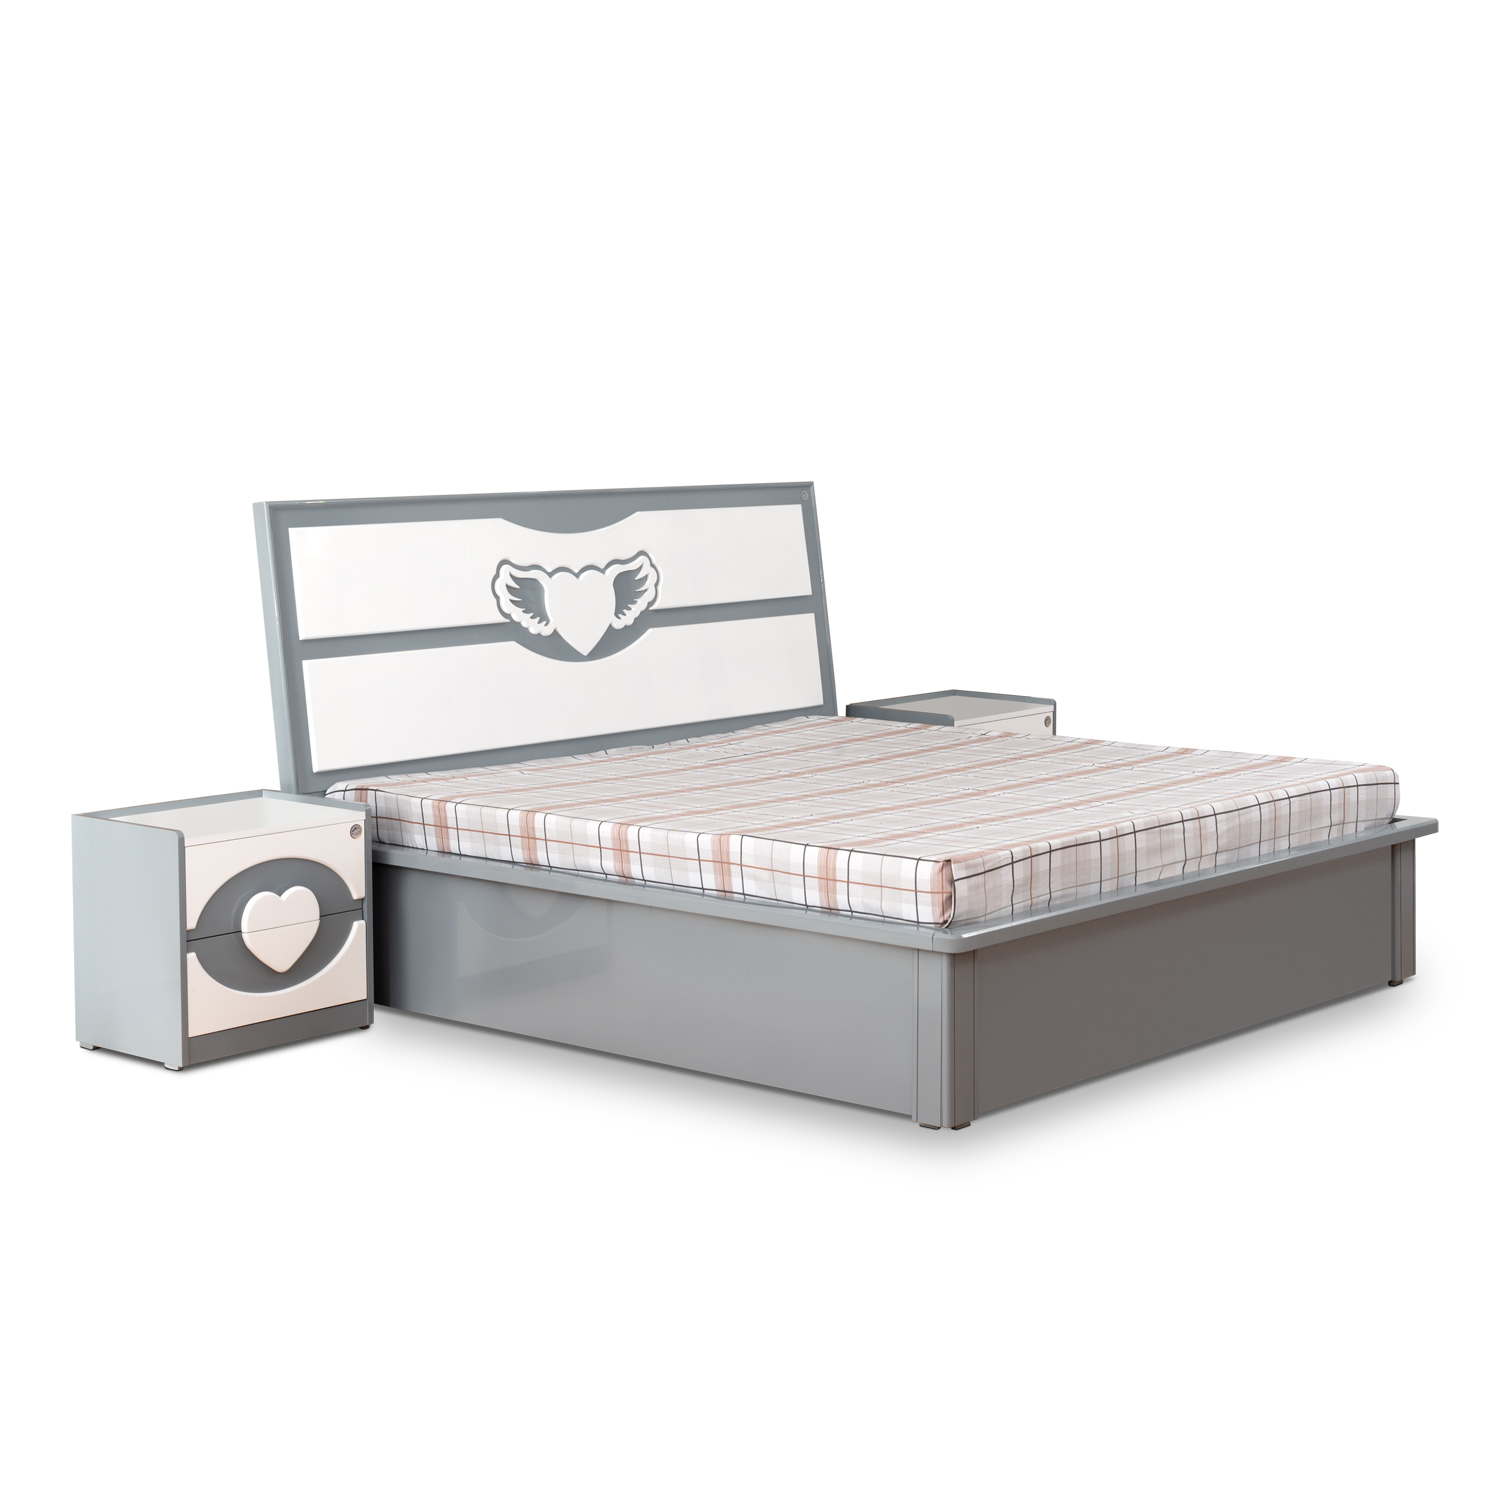 Spectra King Bed